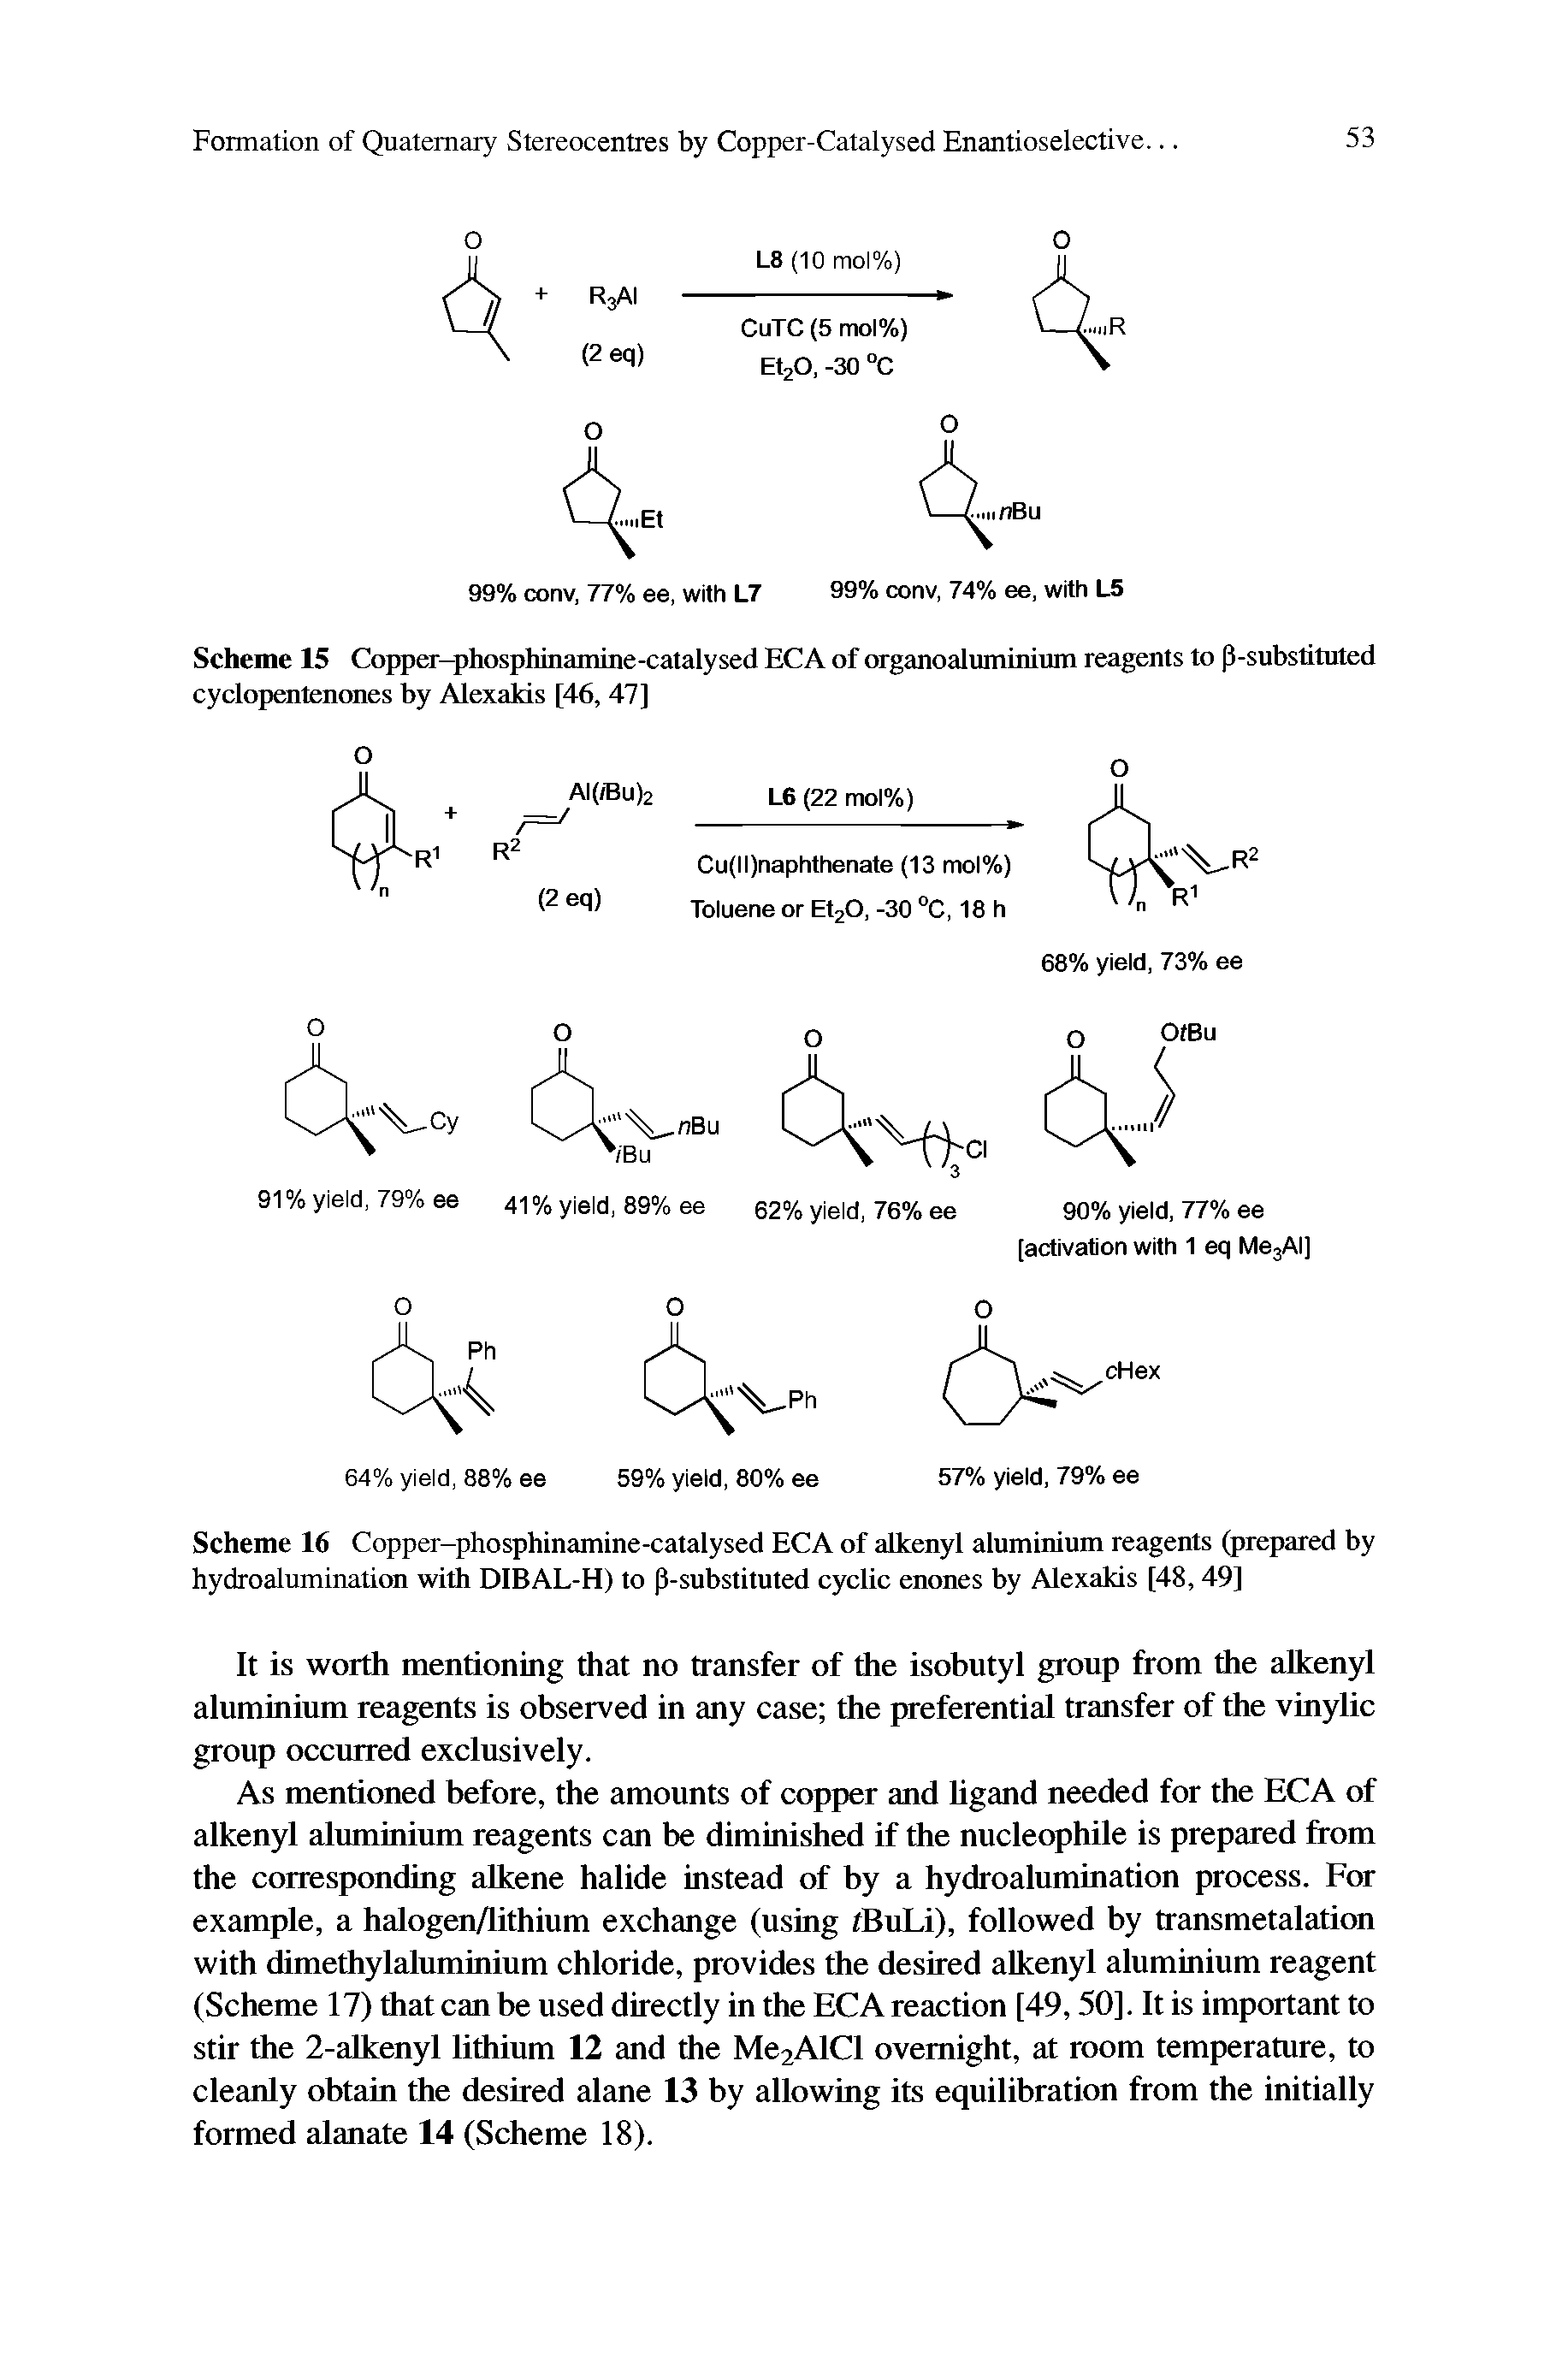 Scheme 16 Copper-phosphinamine-catalysed ECA of alkenyl aluminium reagents (prepared by hydroalumination with DIBAL-H) to P-substituted cyclic enones by Alexakis [48,49]...